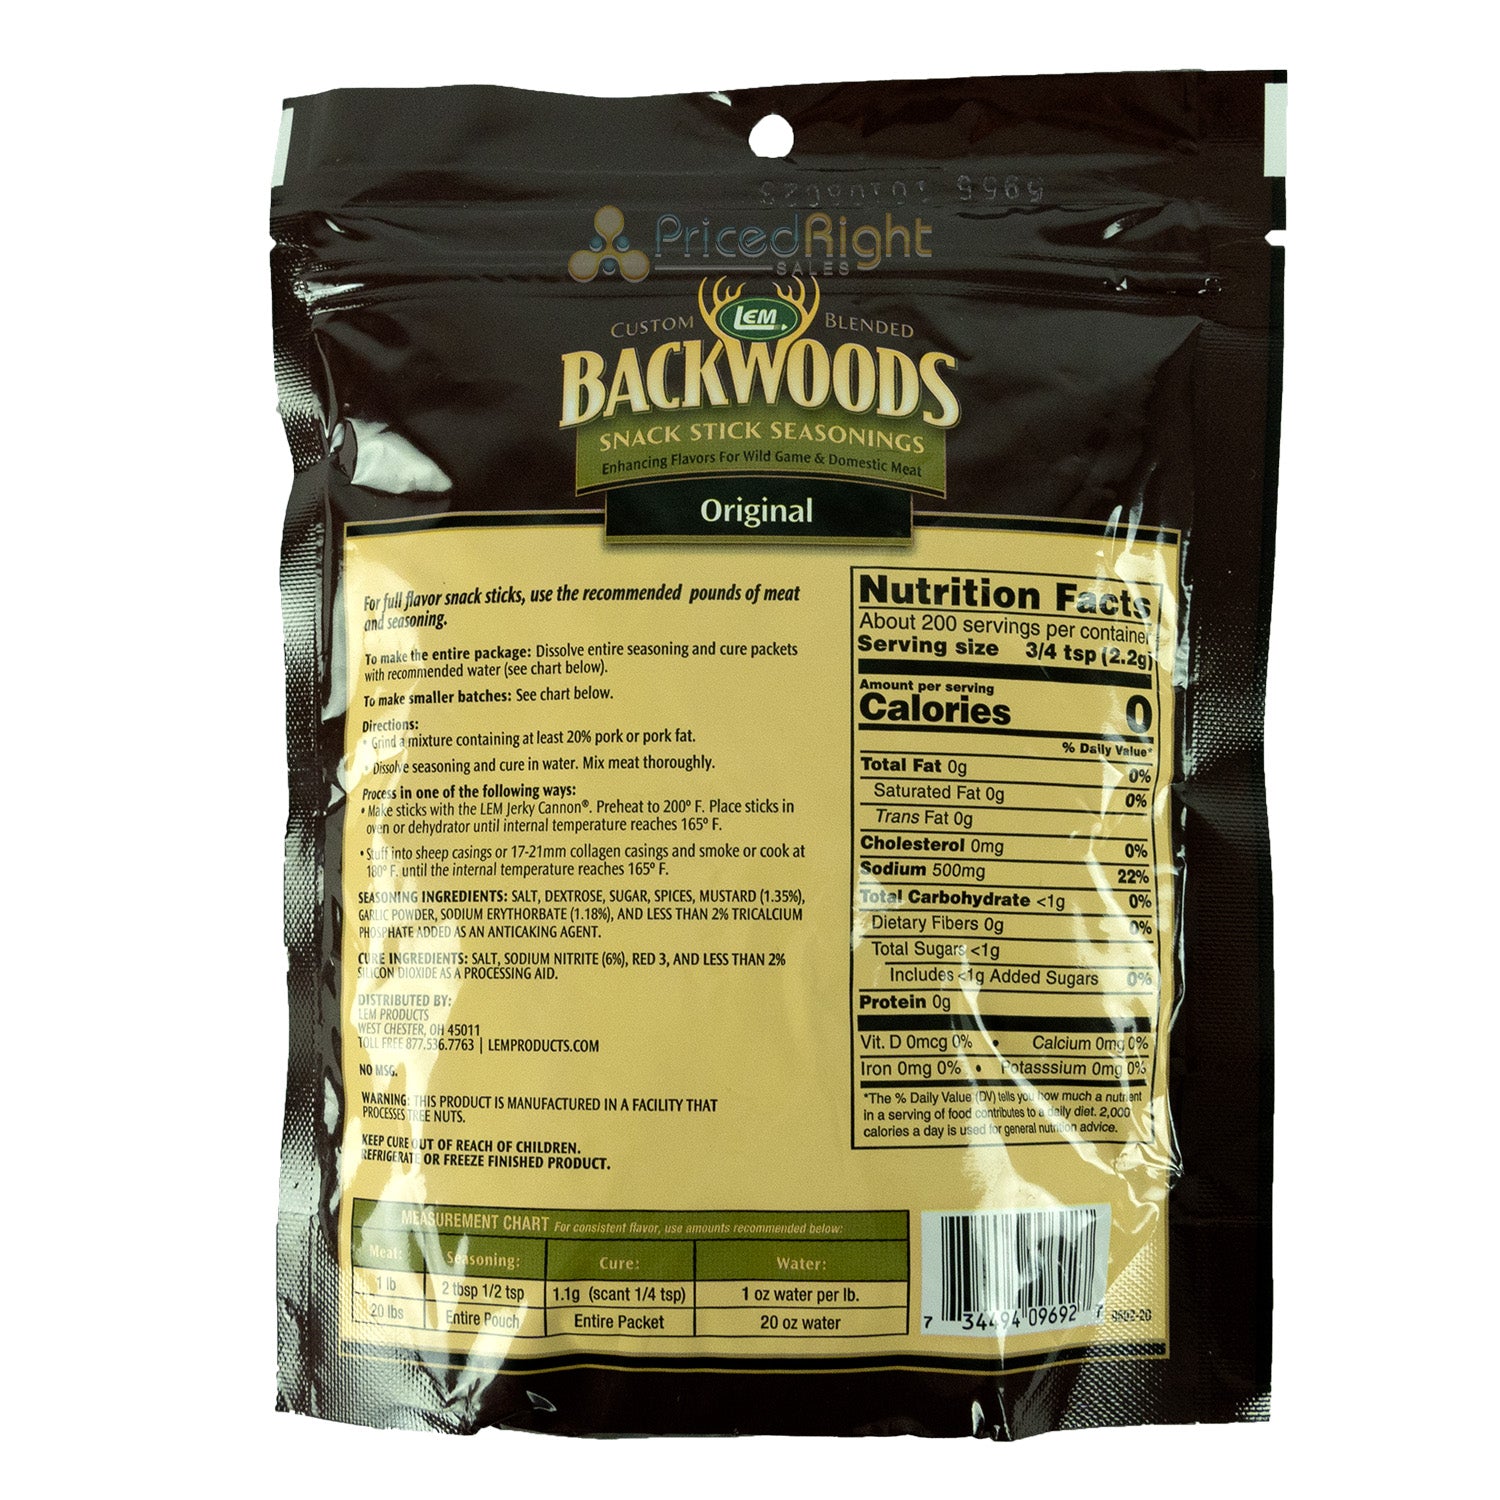 Backwoods Specialty Meats and Processing